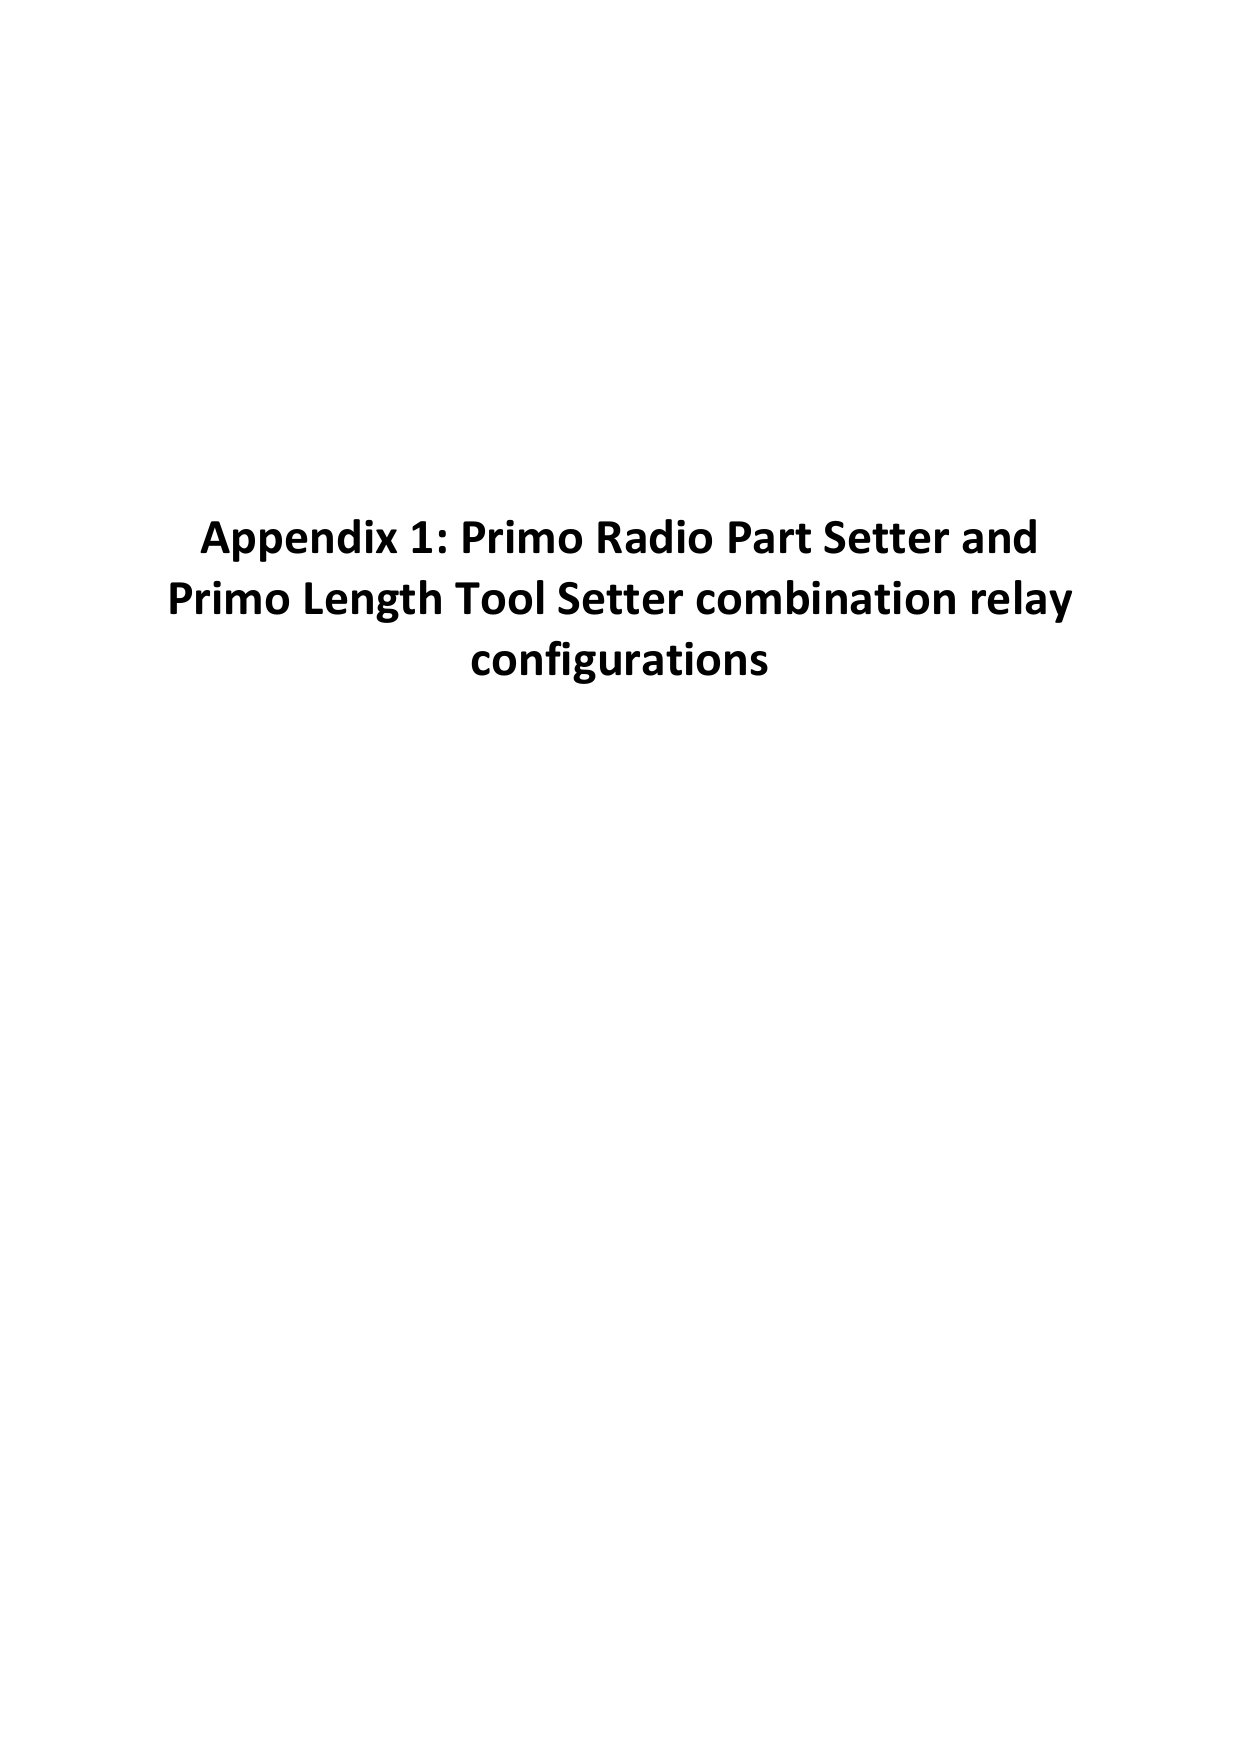          Appendix 1: Primo Radio Part Setter and Primo Length Tool Setter combination relay configurations                                    